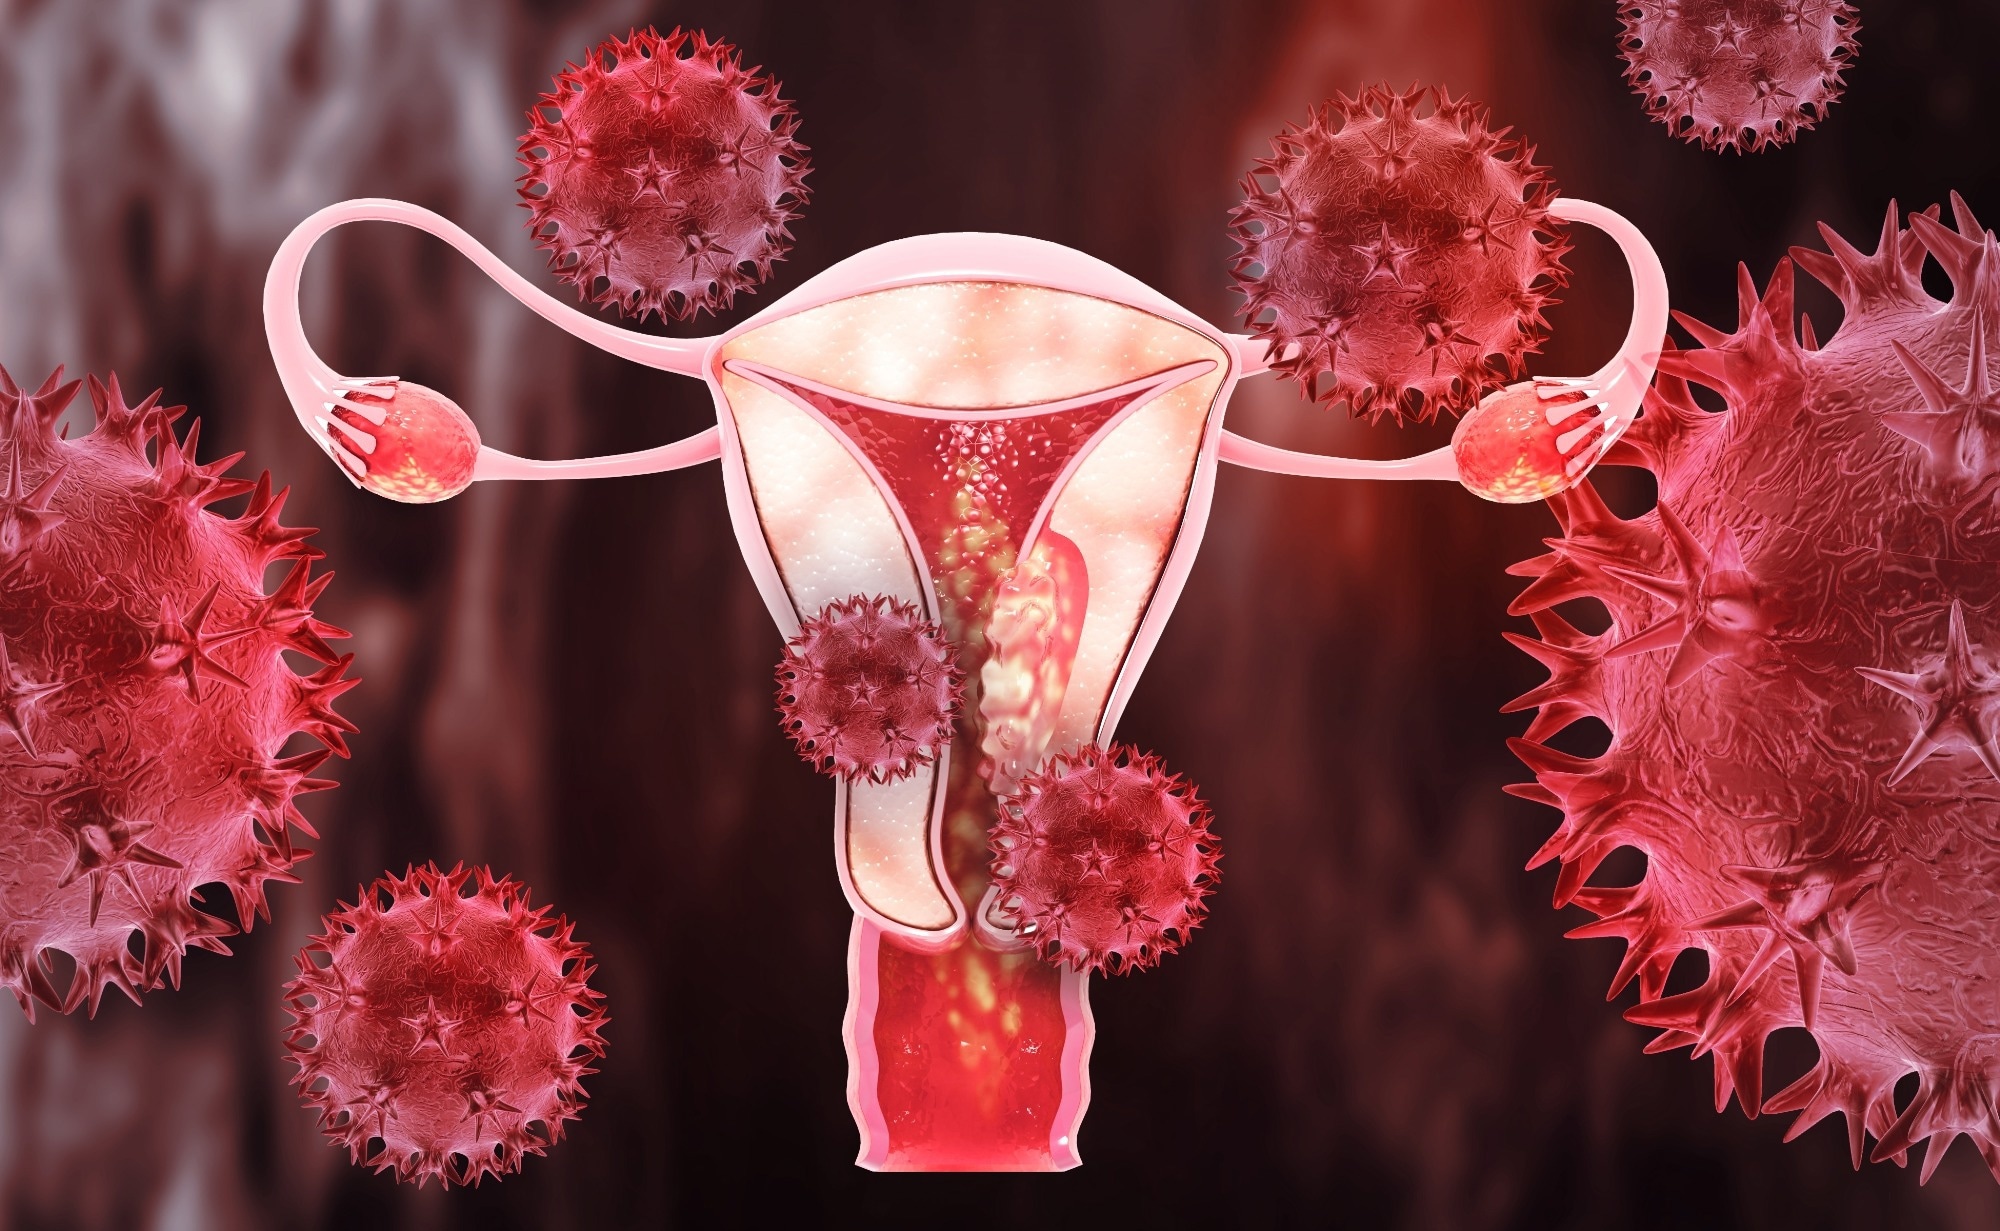 Study: Detection of endometrial cancer in cervicovaginal fluid and blood plasma: leveraging proteomics and machine learning for biomarker discovery. Image Credit: crystal light / Shutterstock.com